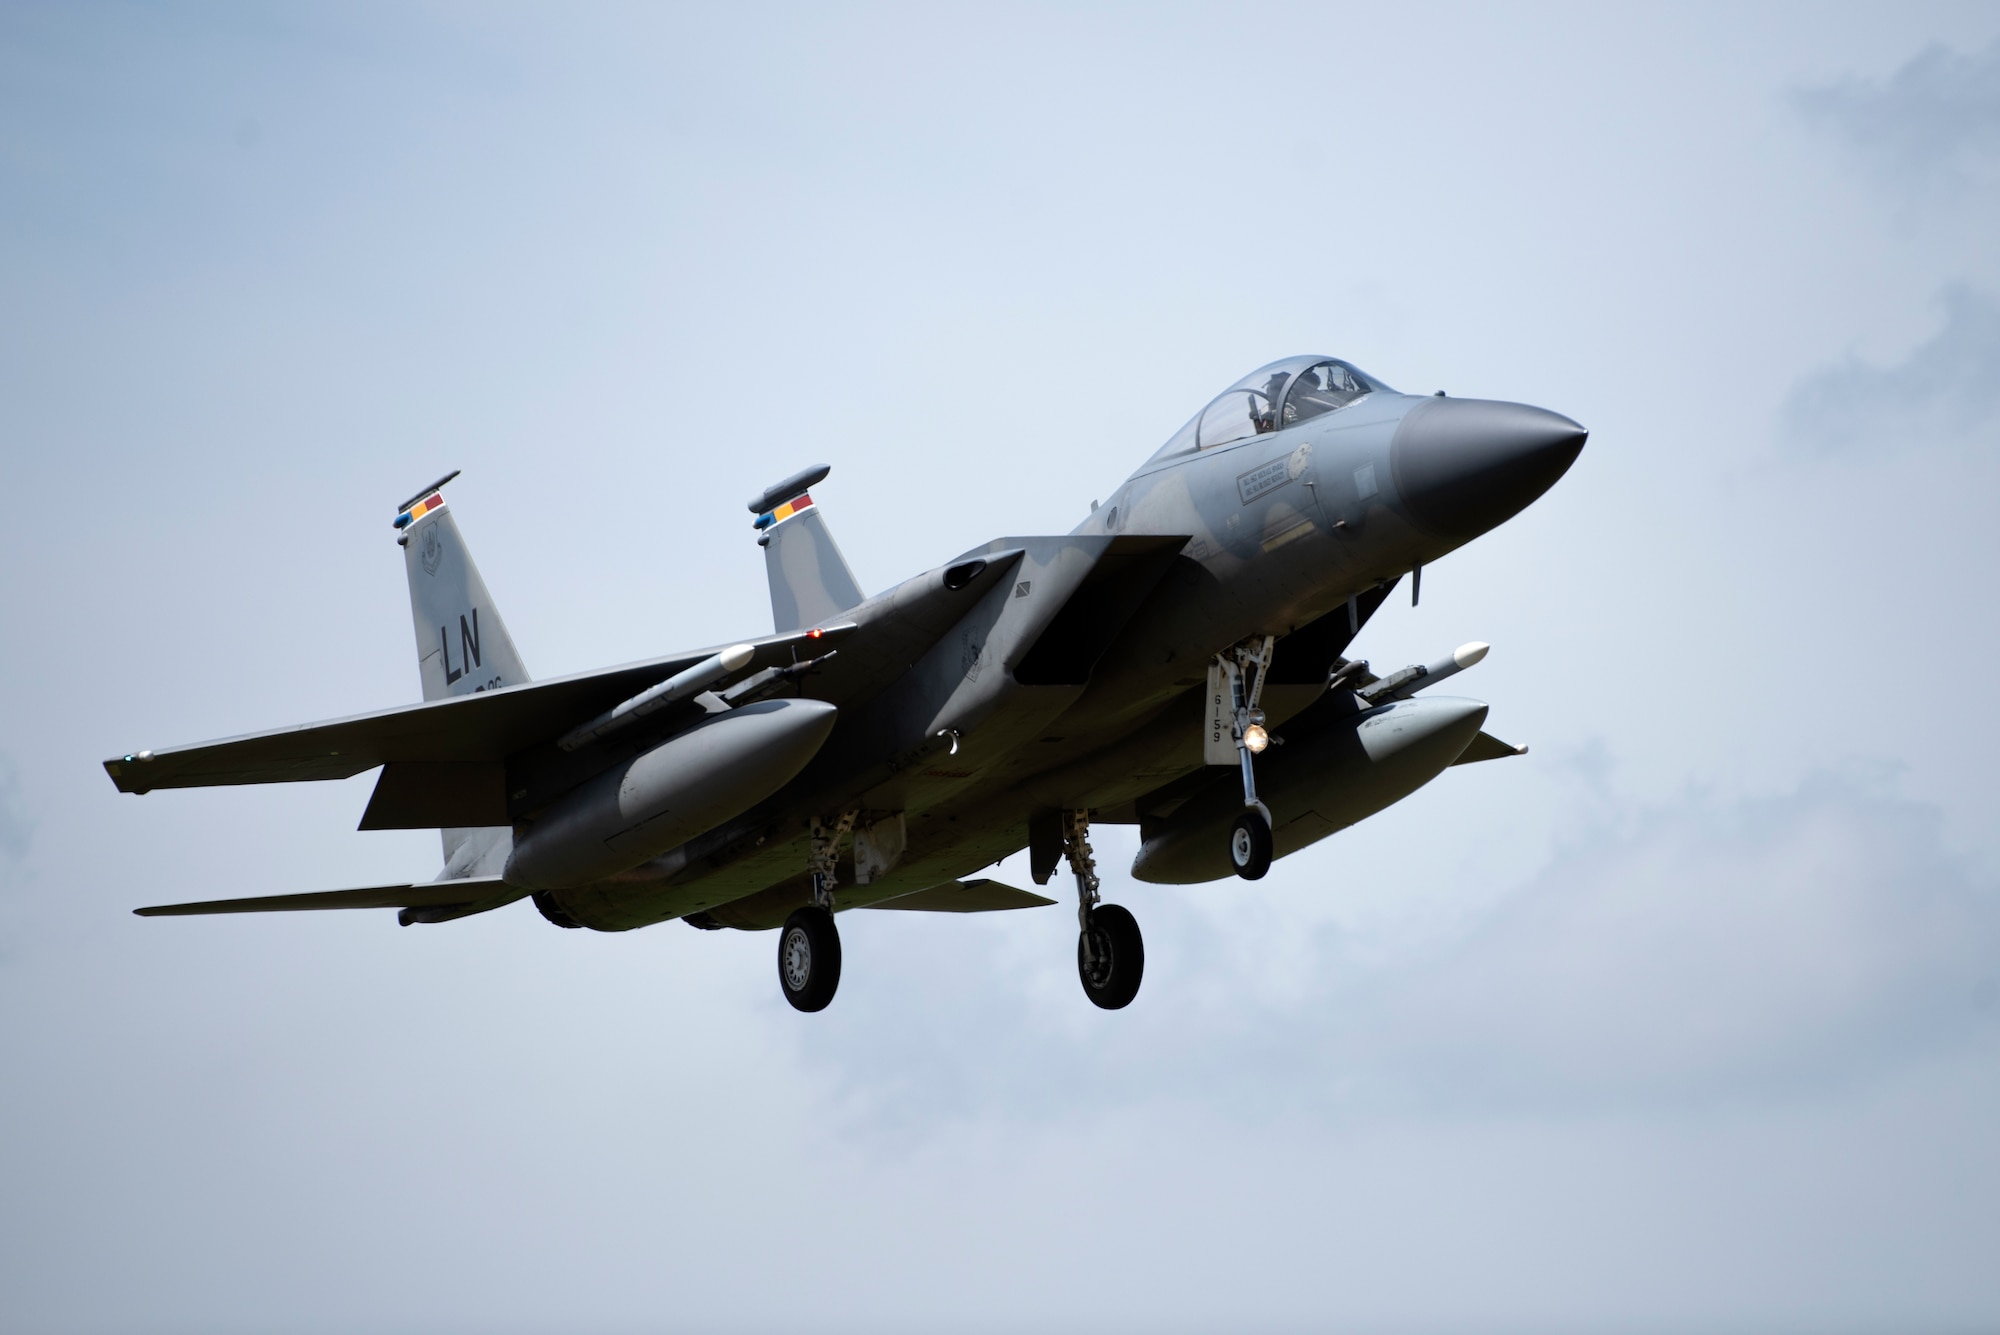 An F-15C Eagle assigned to the 493rd Fighter Squadron prepares to land at Royal Air Force Lakenheath, England, June 2, 2020. The 493rd FS conducts routine training to ensure the Liberty Wing is always ready to deliver air combat capabilities to the fight when called upon. (U.S. Air Force photo by Airman 1st Class Jessi Monte)